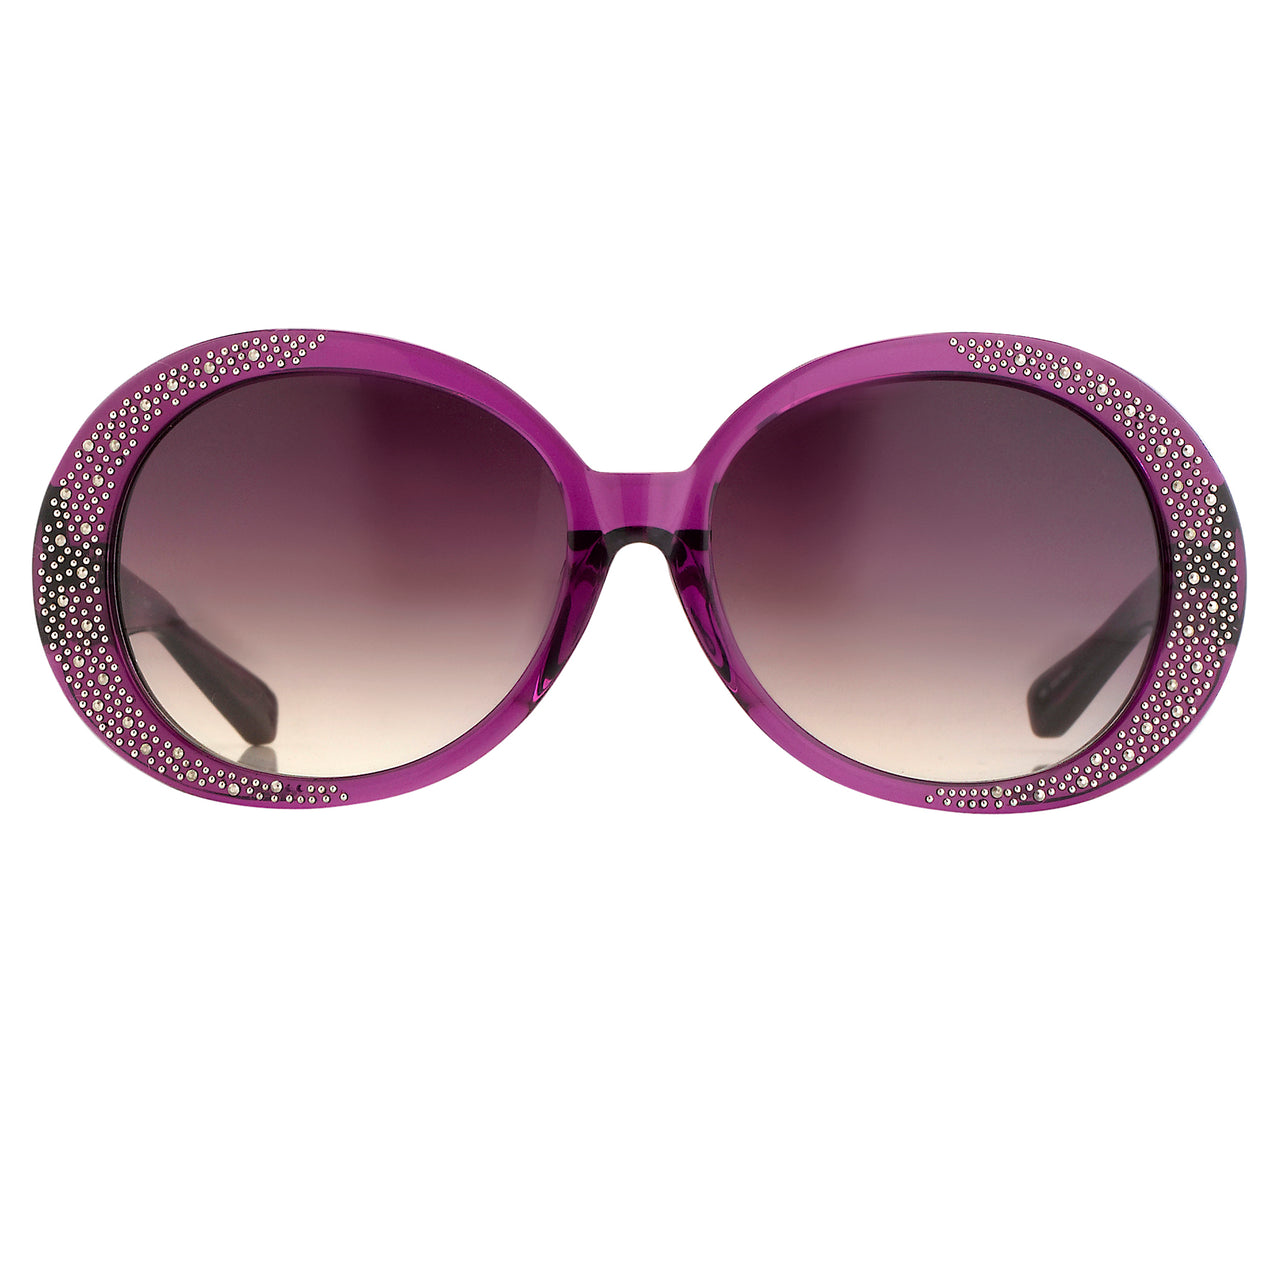 Agent Provocateur Oversized Frame Purple and Brown Lenses